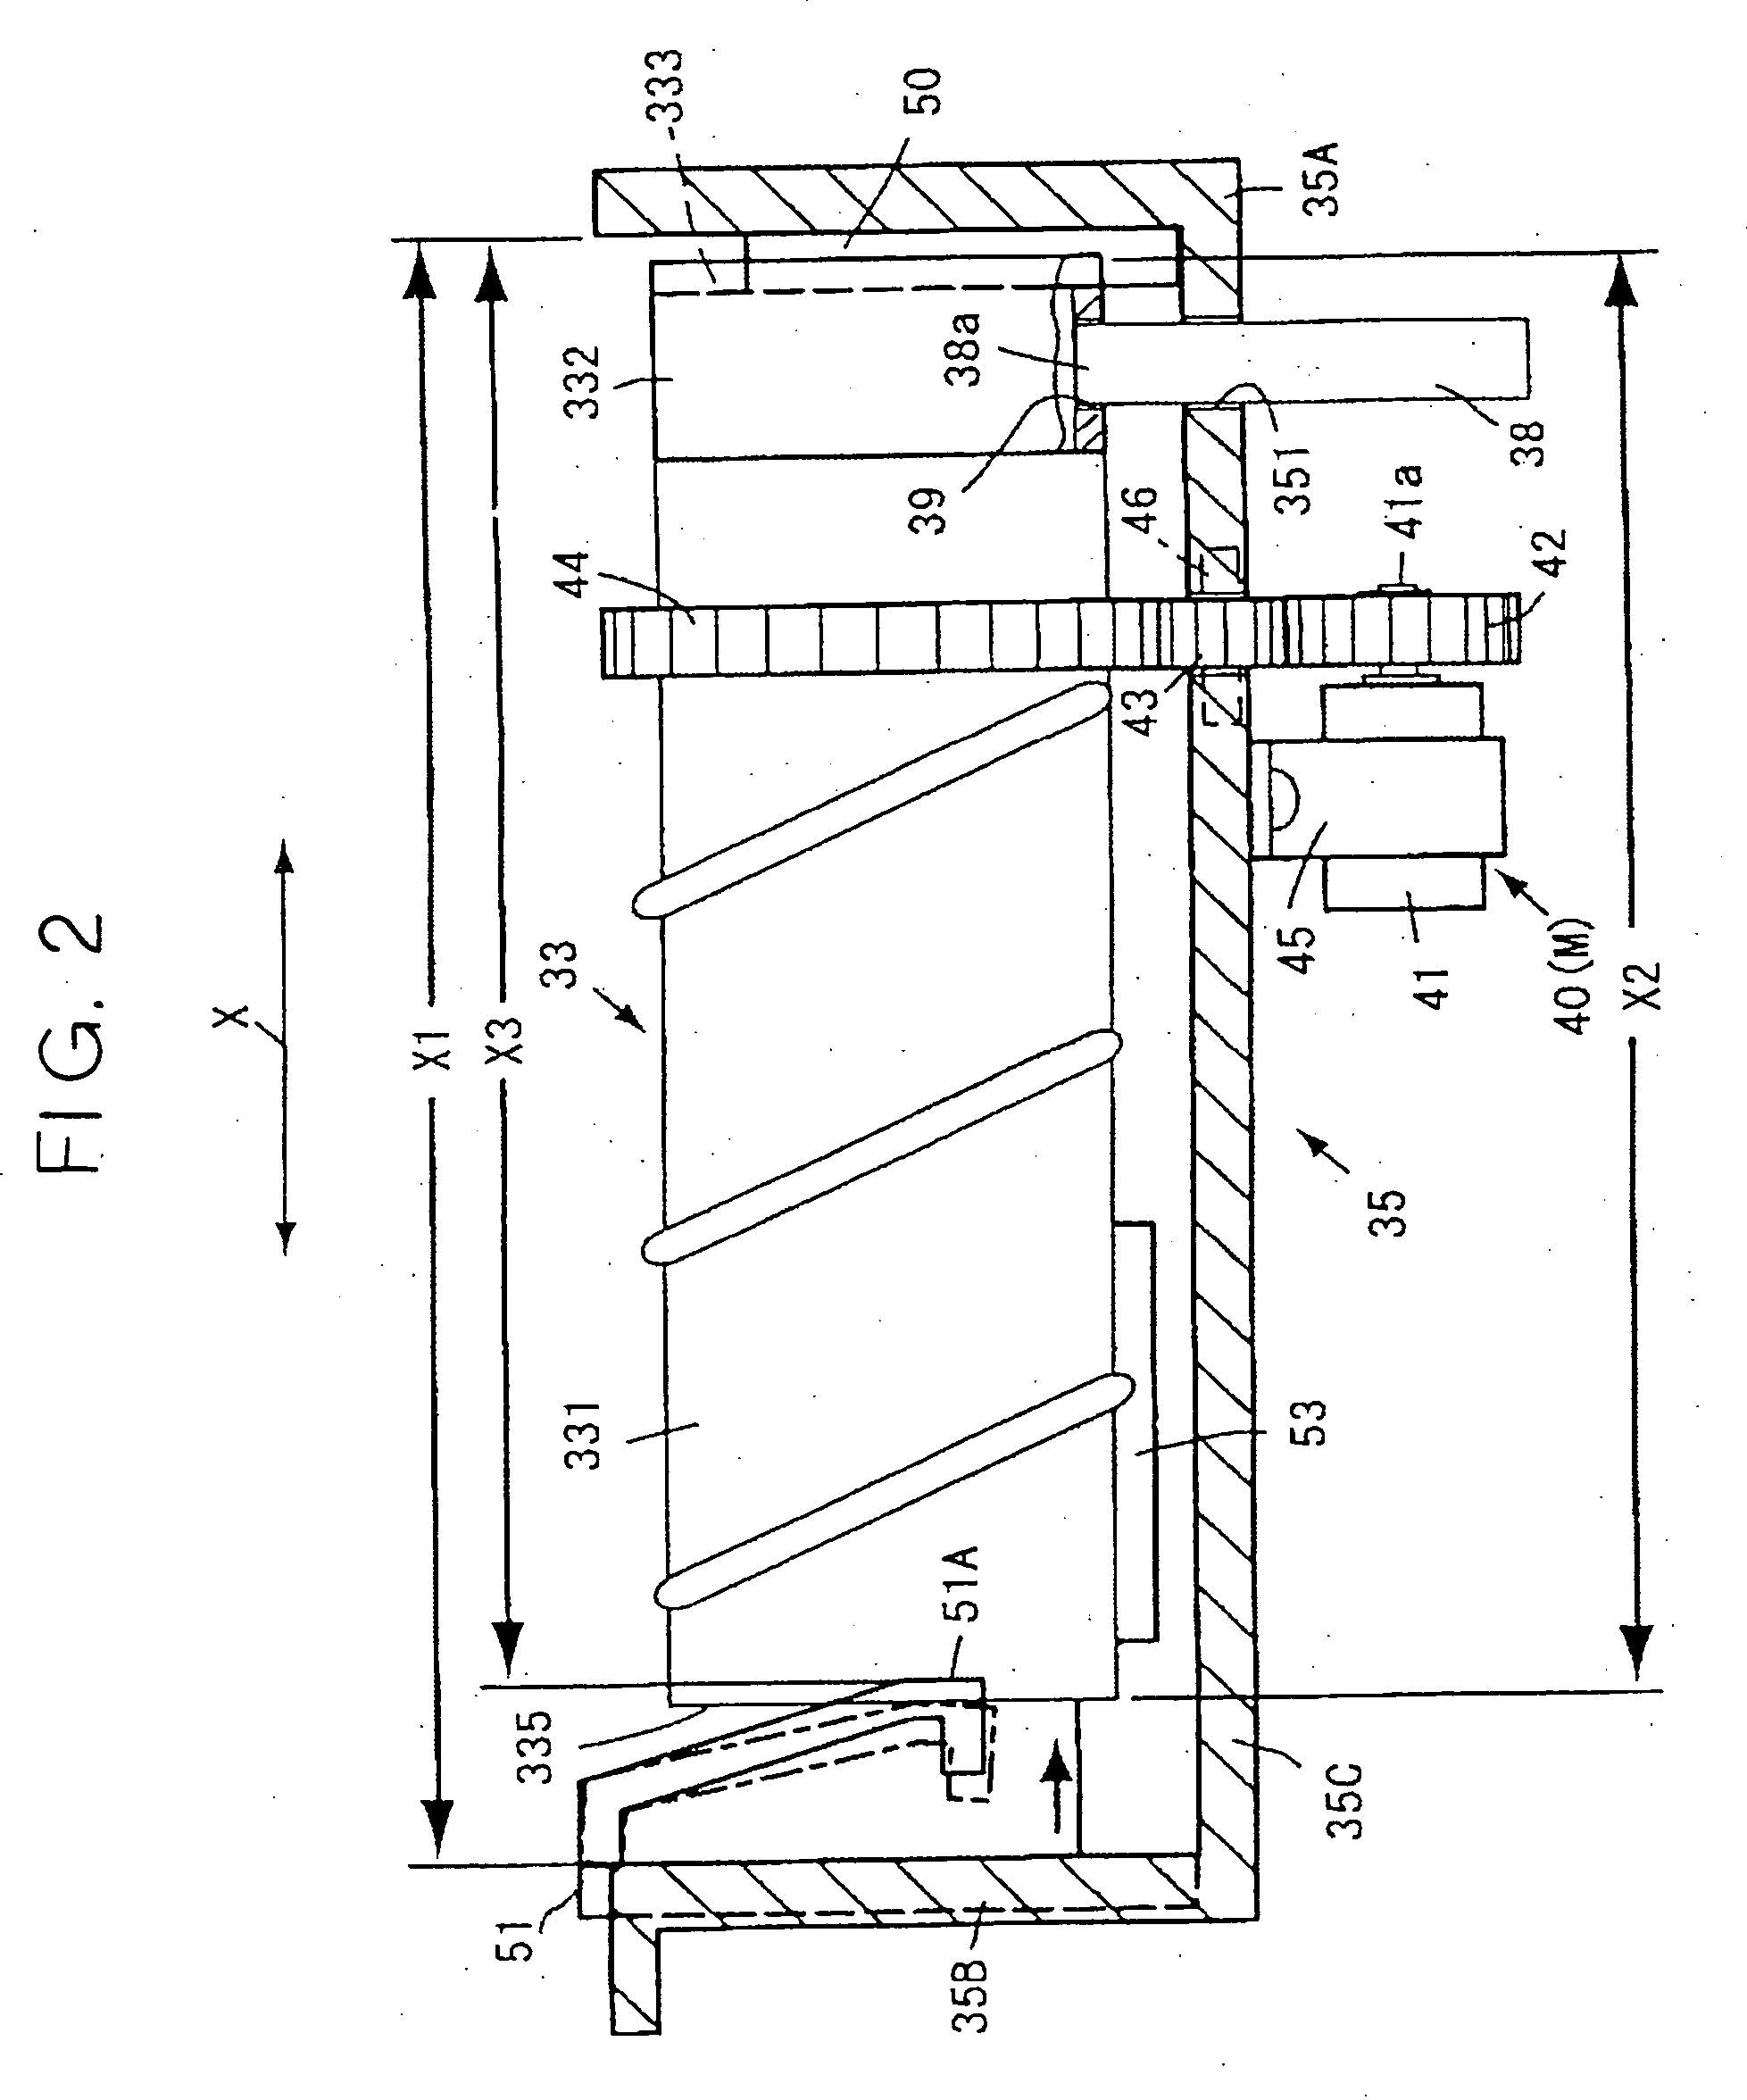 Image forming device and mounting member for mounting a toner container thereon